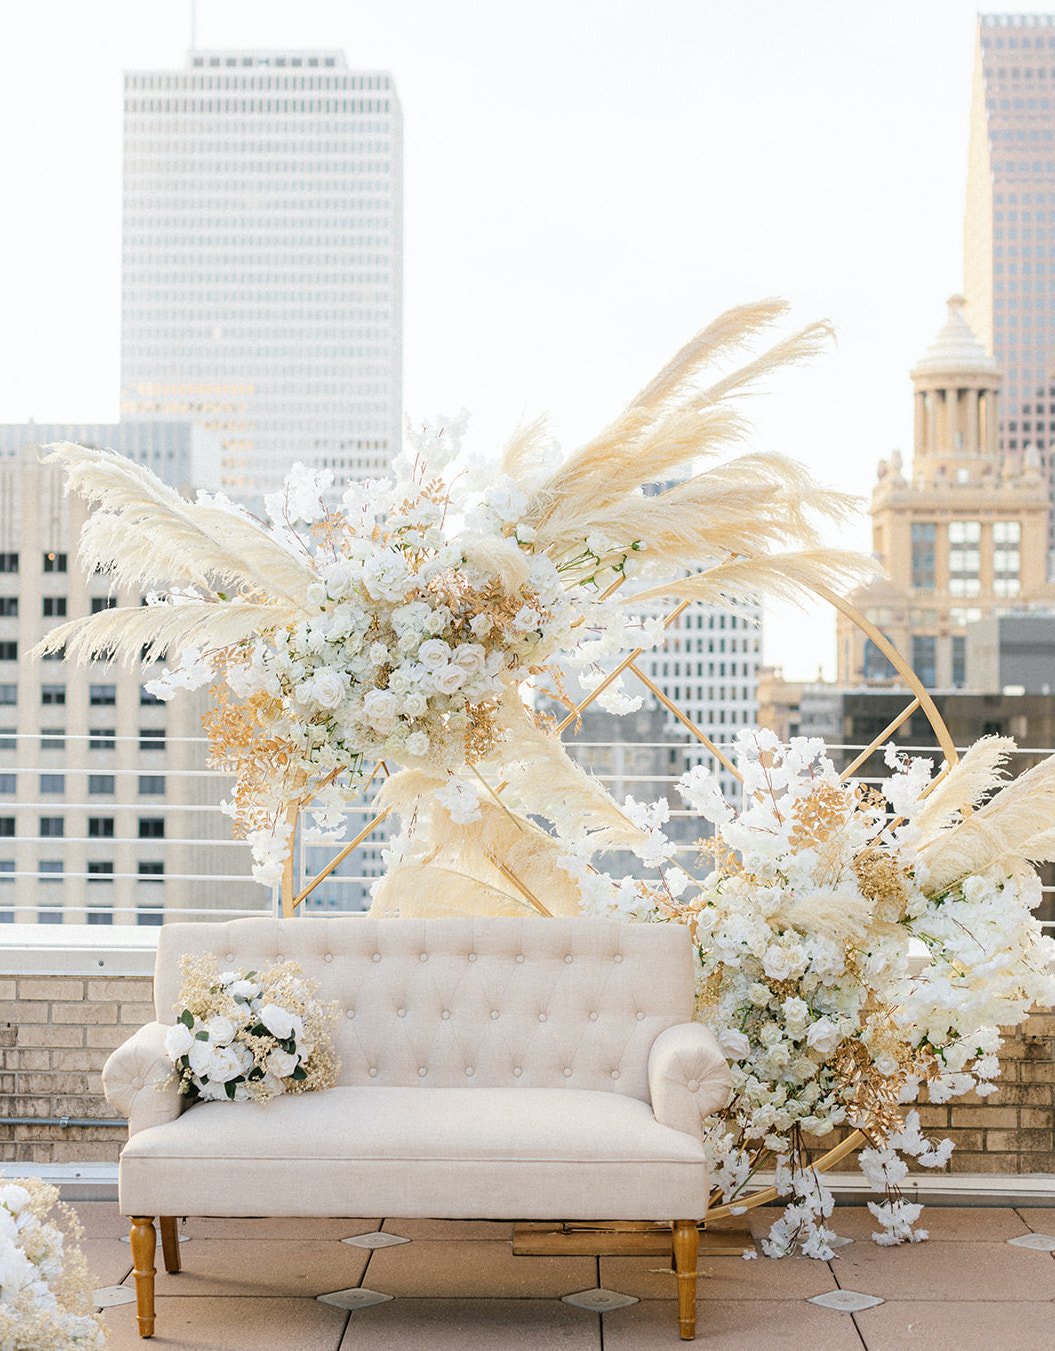 A couch is decorated for the ethereal rooftop wedding styled shoot.